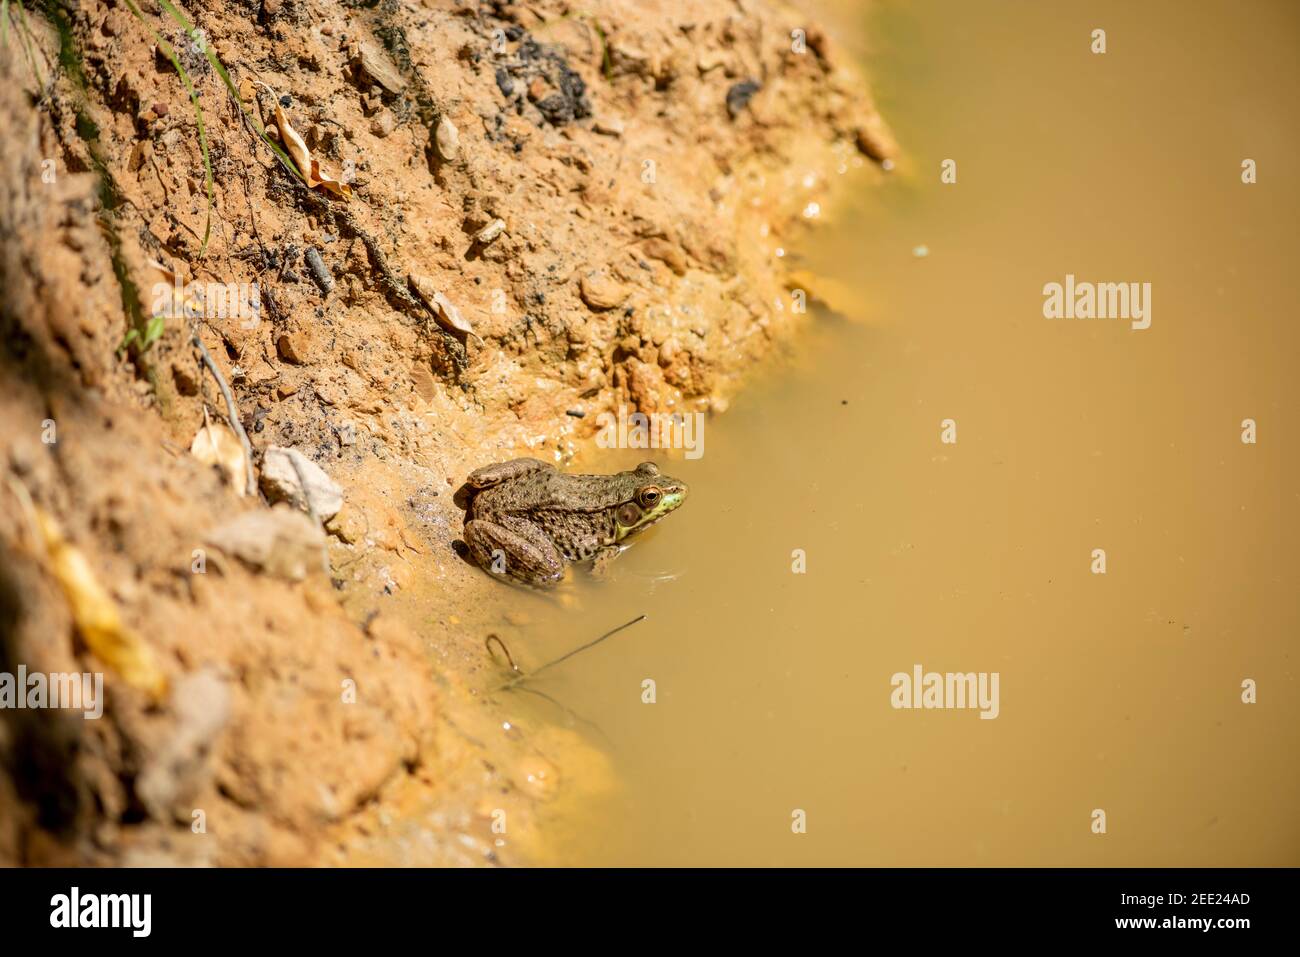 American bullfrog (Lithobates catesbeianus) cools off in a shallow mud puddle. Stock Photo